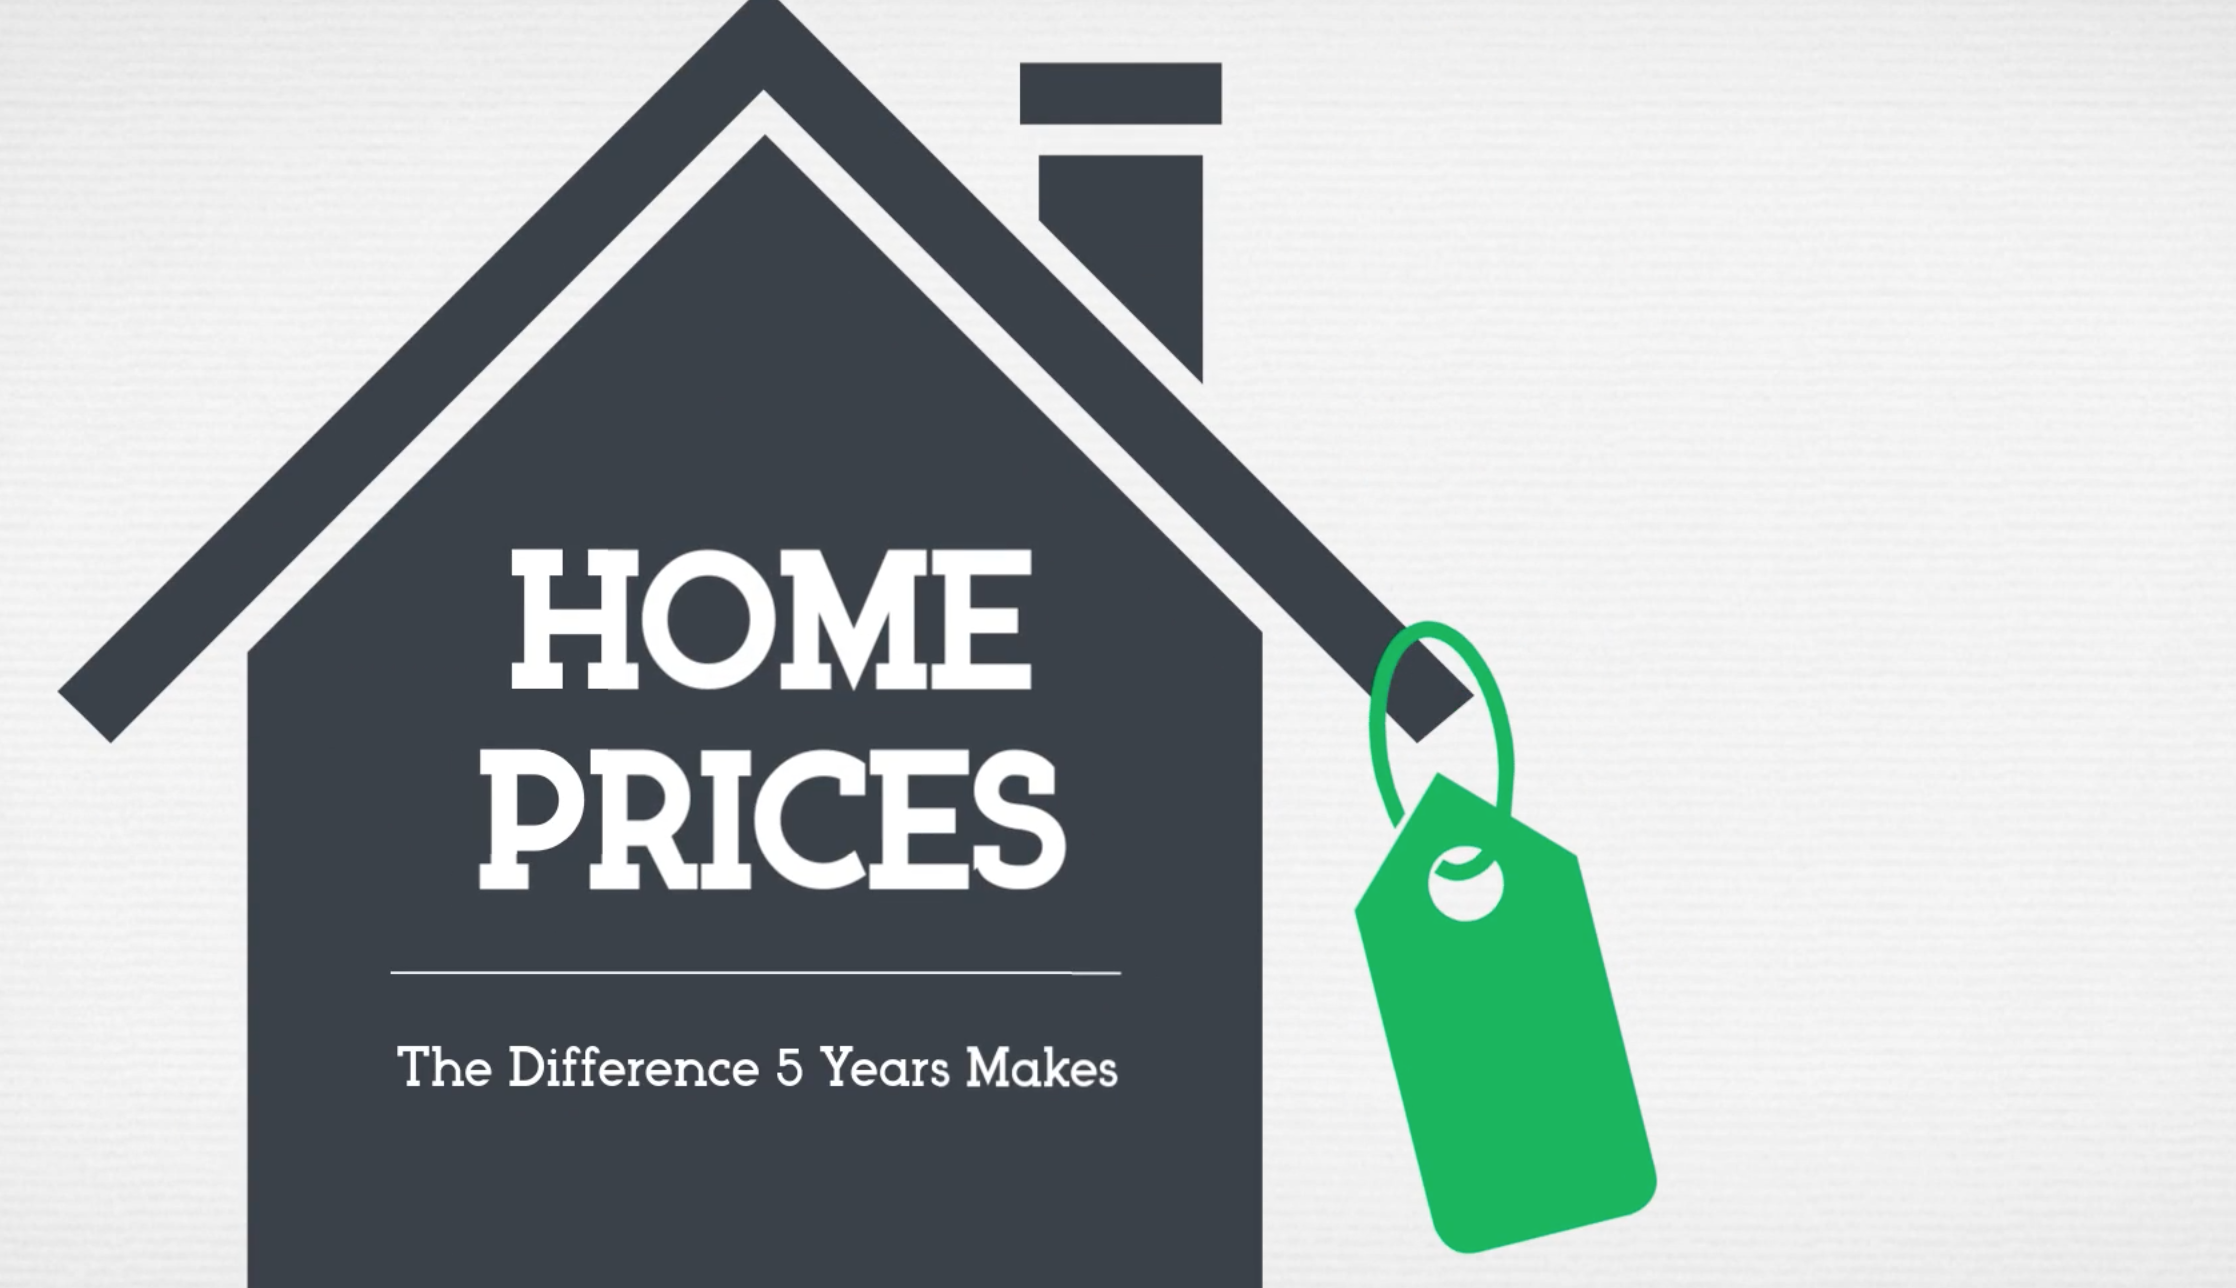 Home Prices - The Difference 5 Years Makes